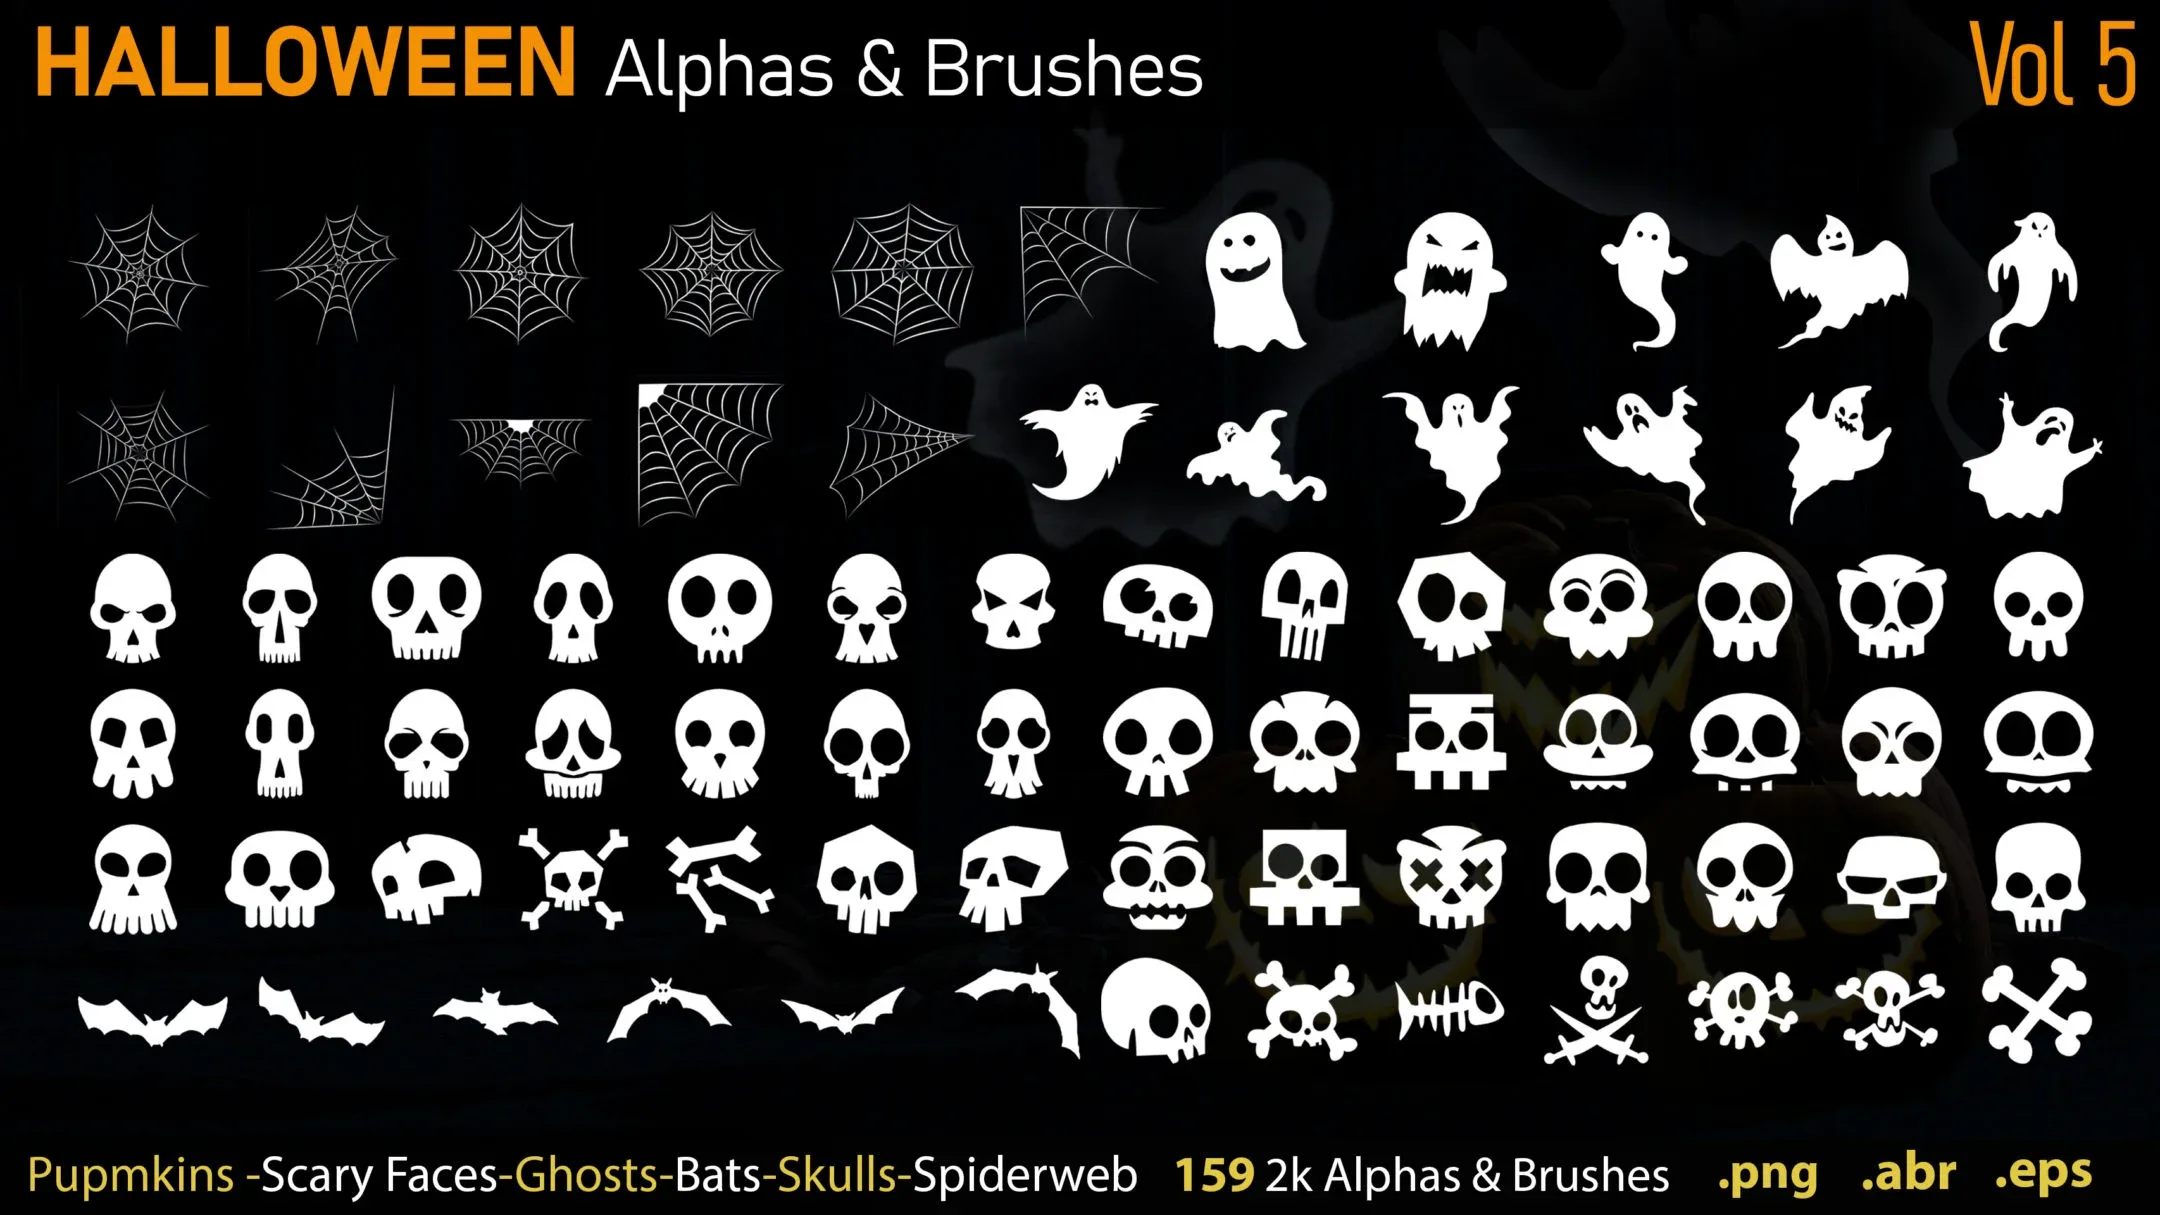 Halloween Alphas & Brushes + eps Files-Vol5